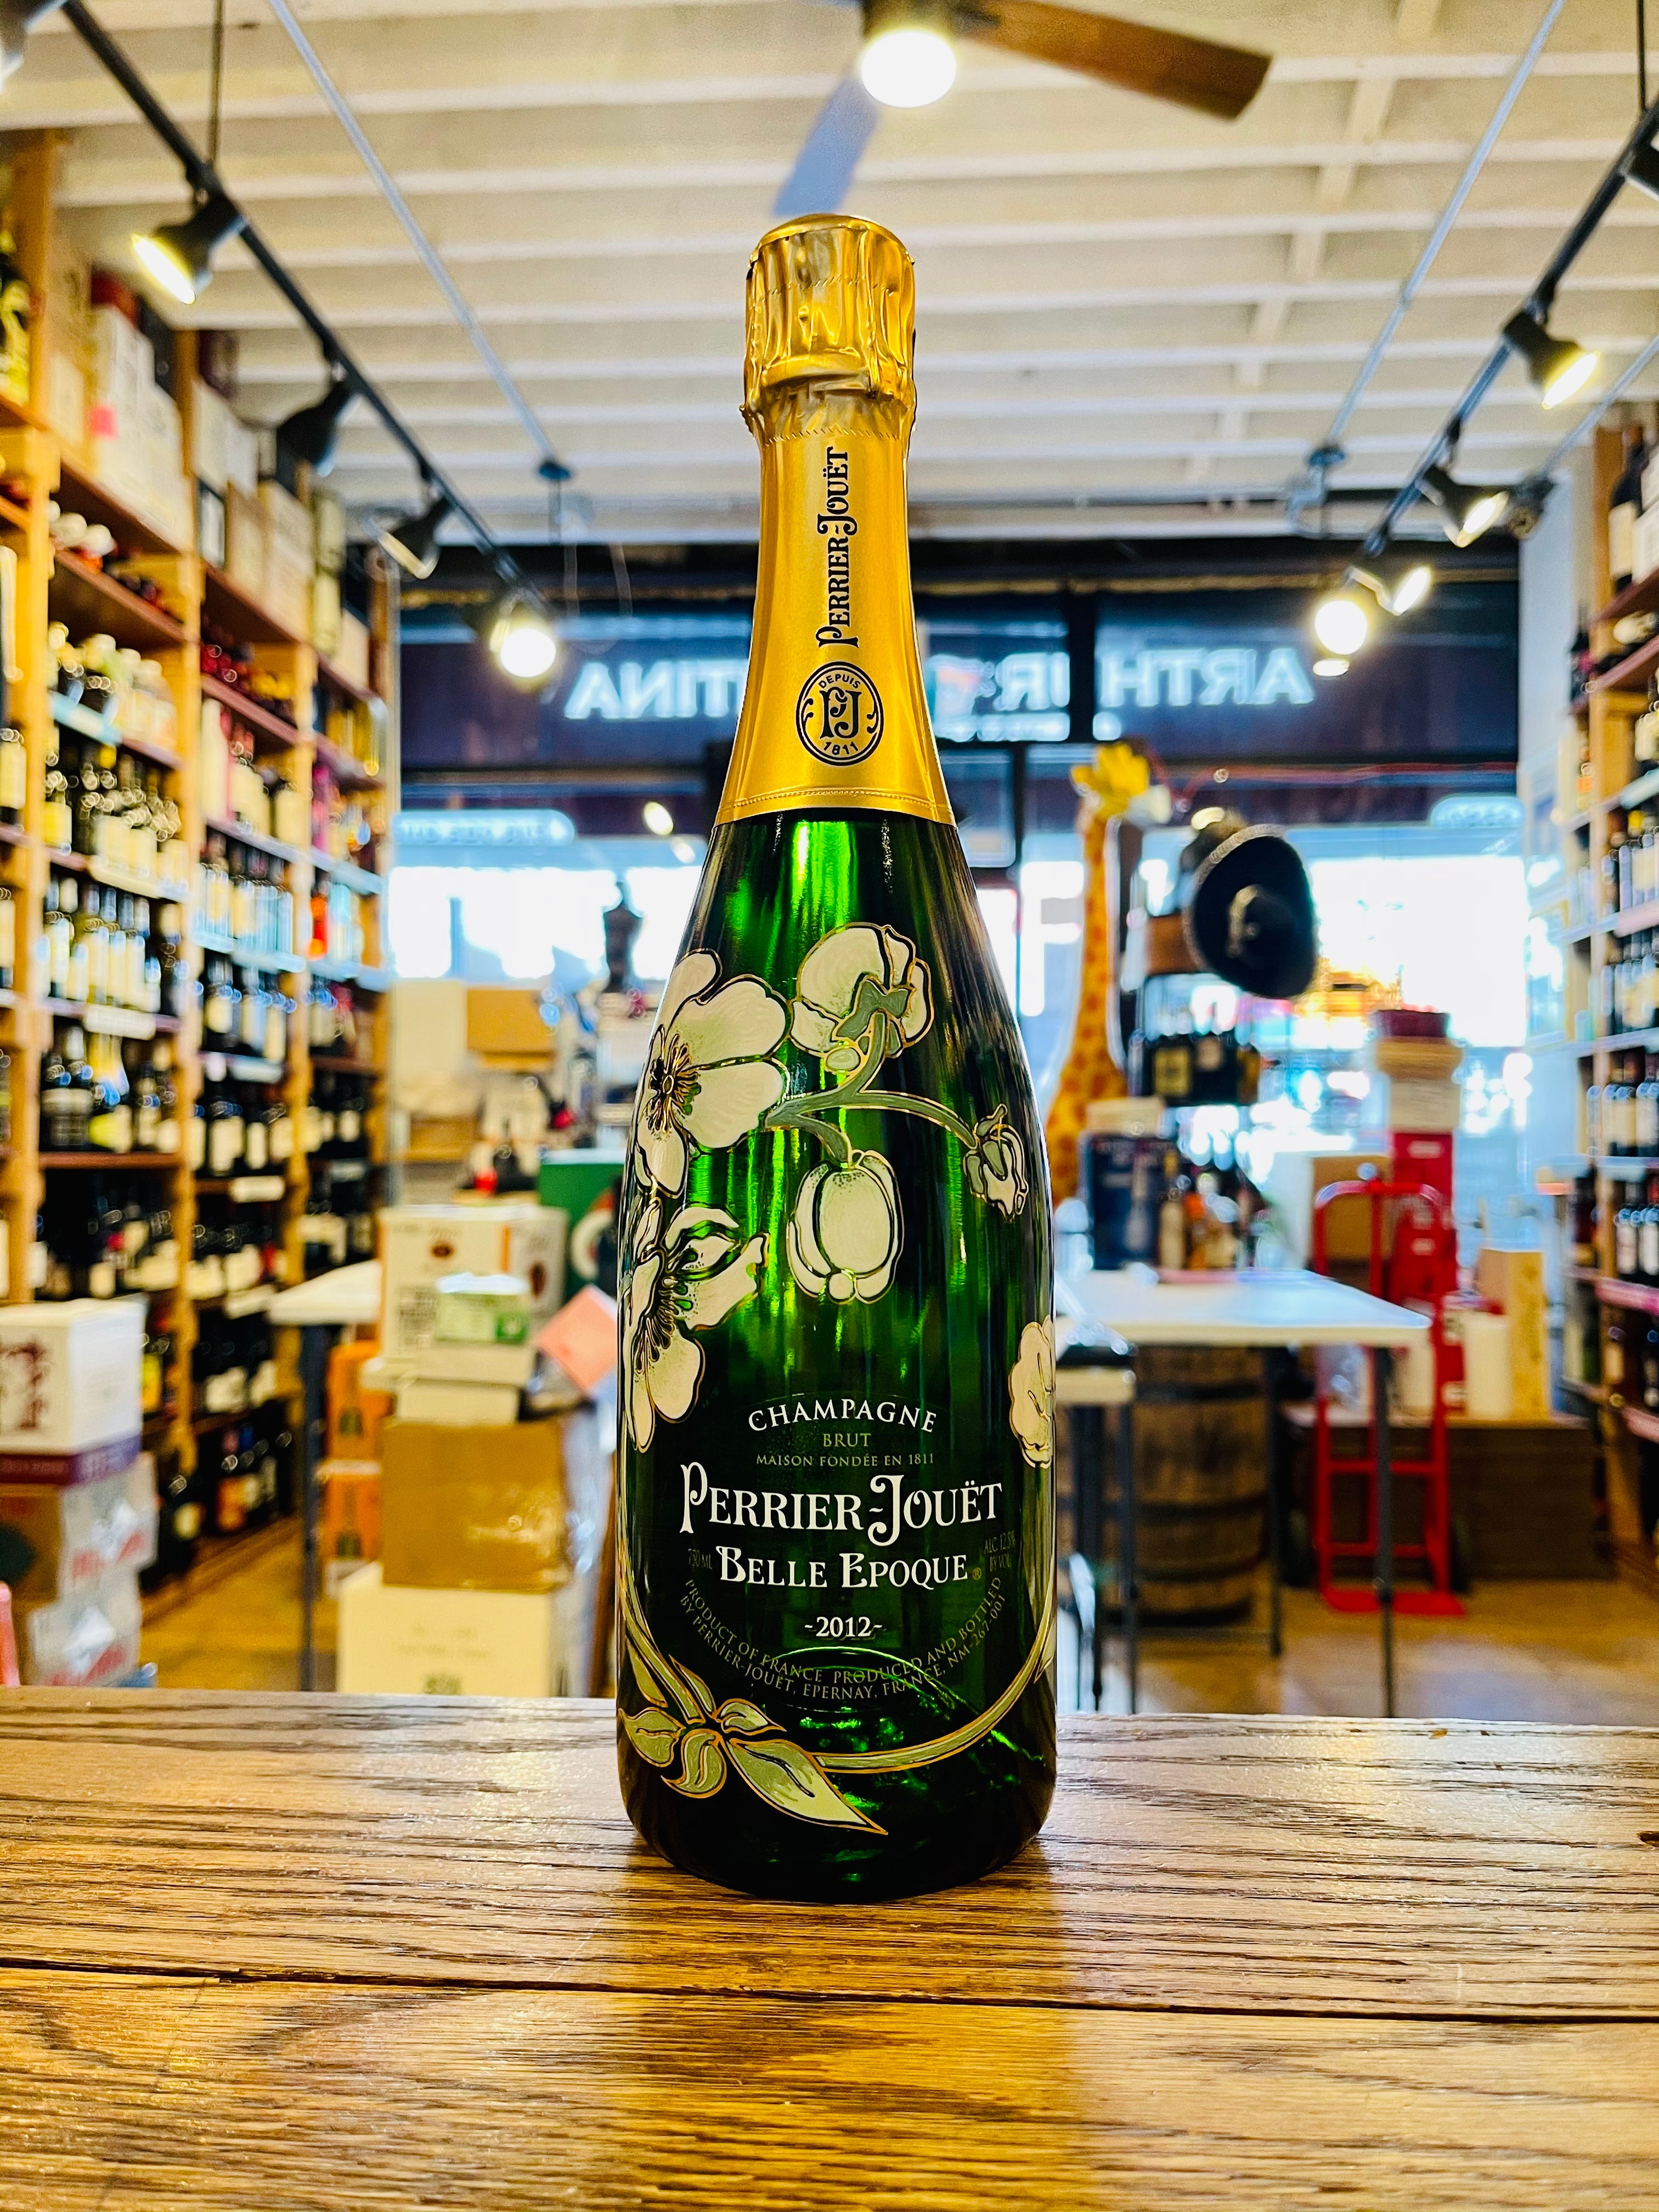 Perrier Jouet Belle Epoque 750mL a green clear glass champagne bottle with designs of flowers on the bottle and a golden top